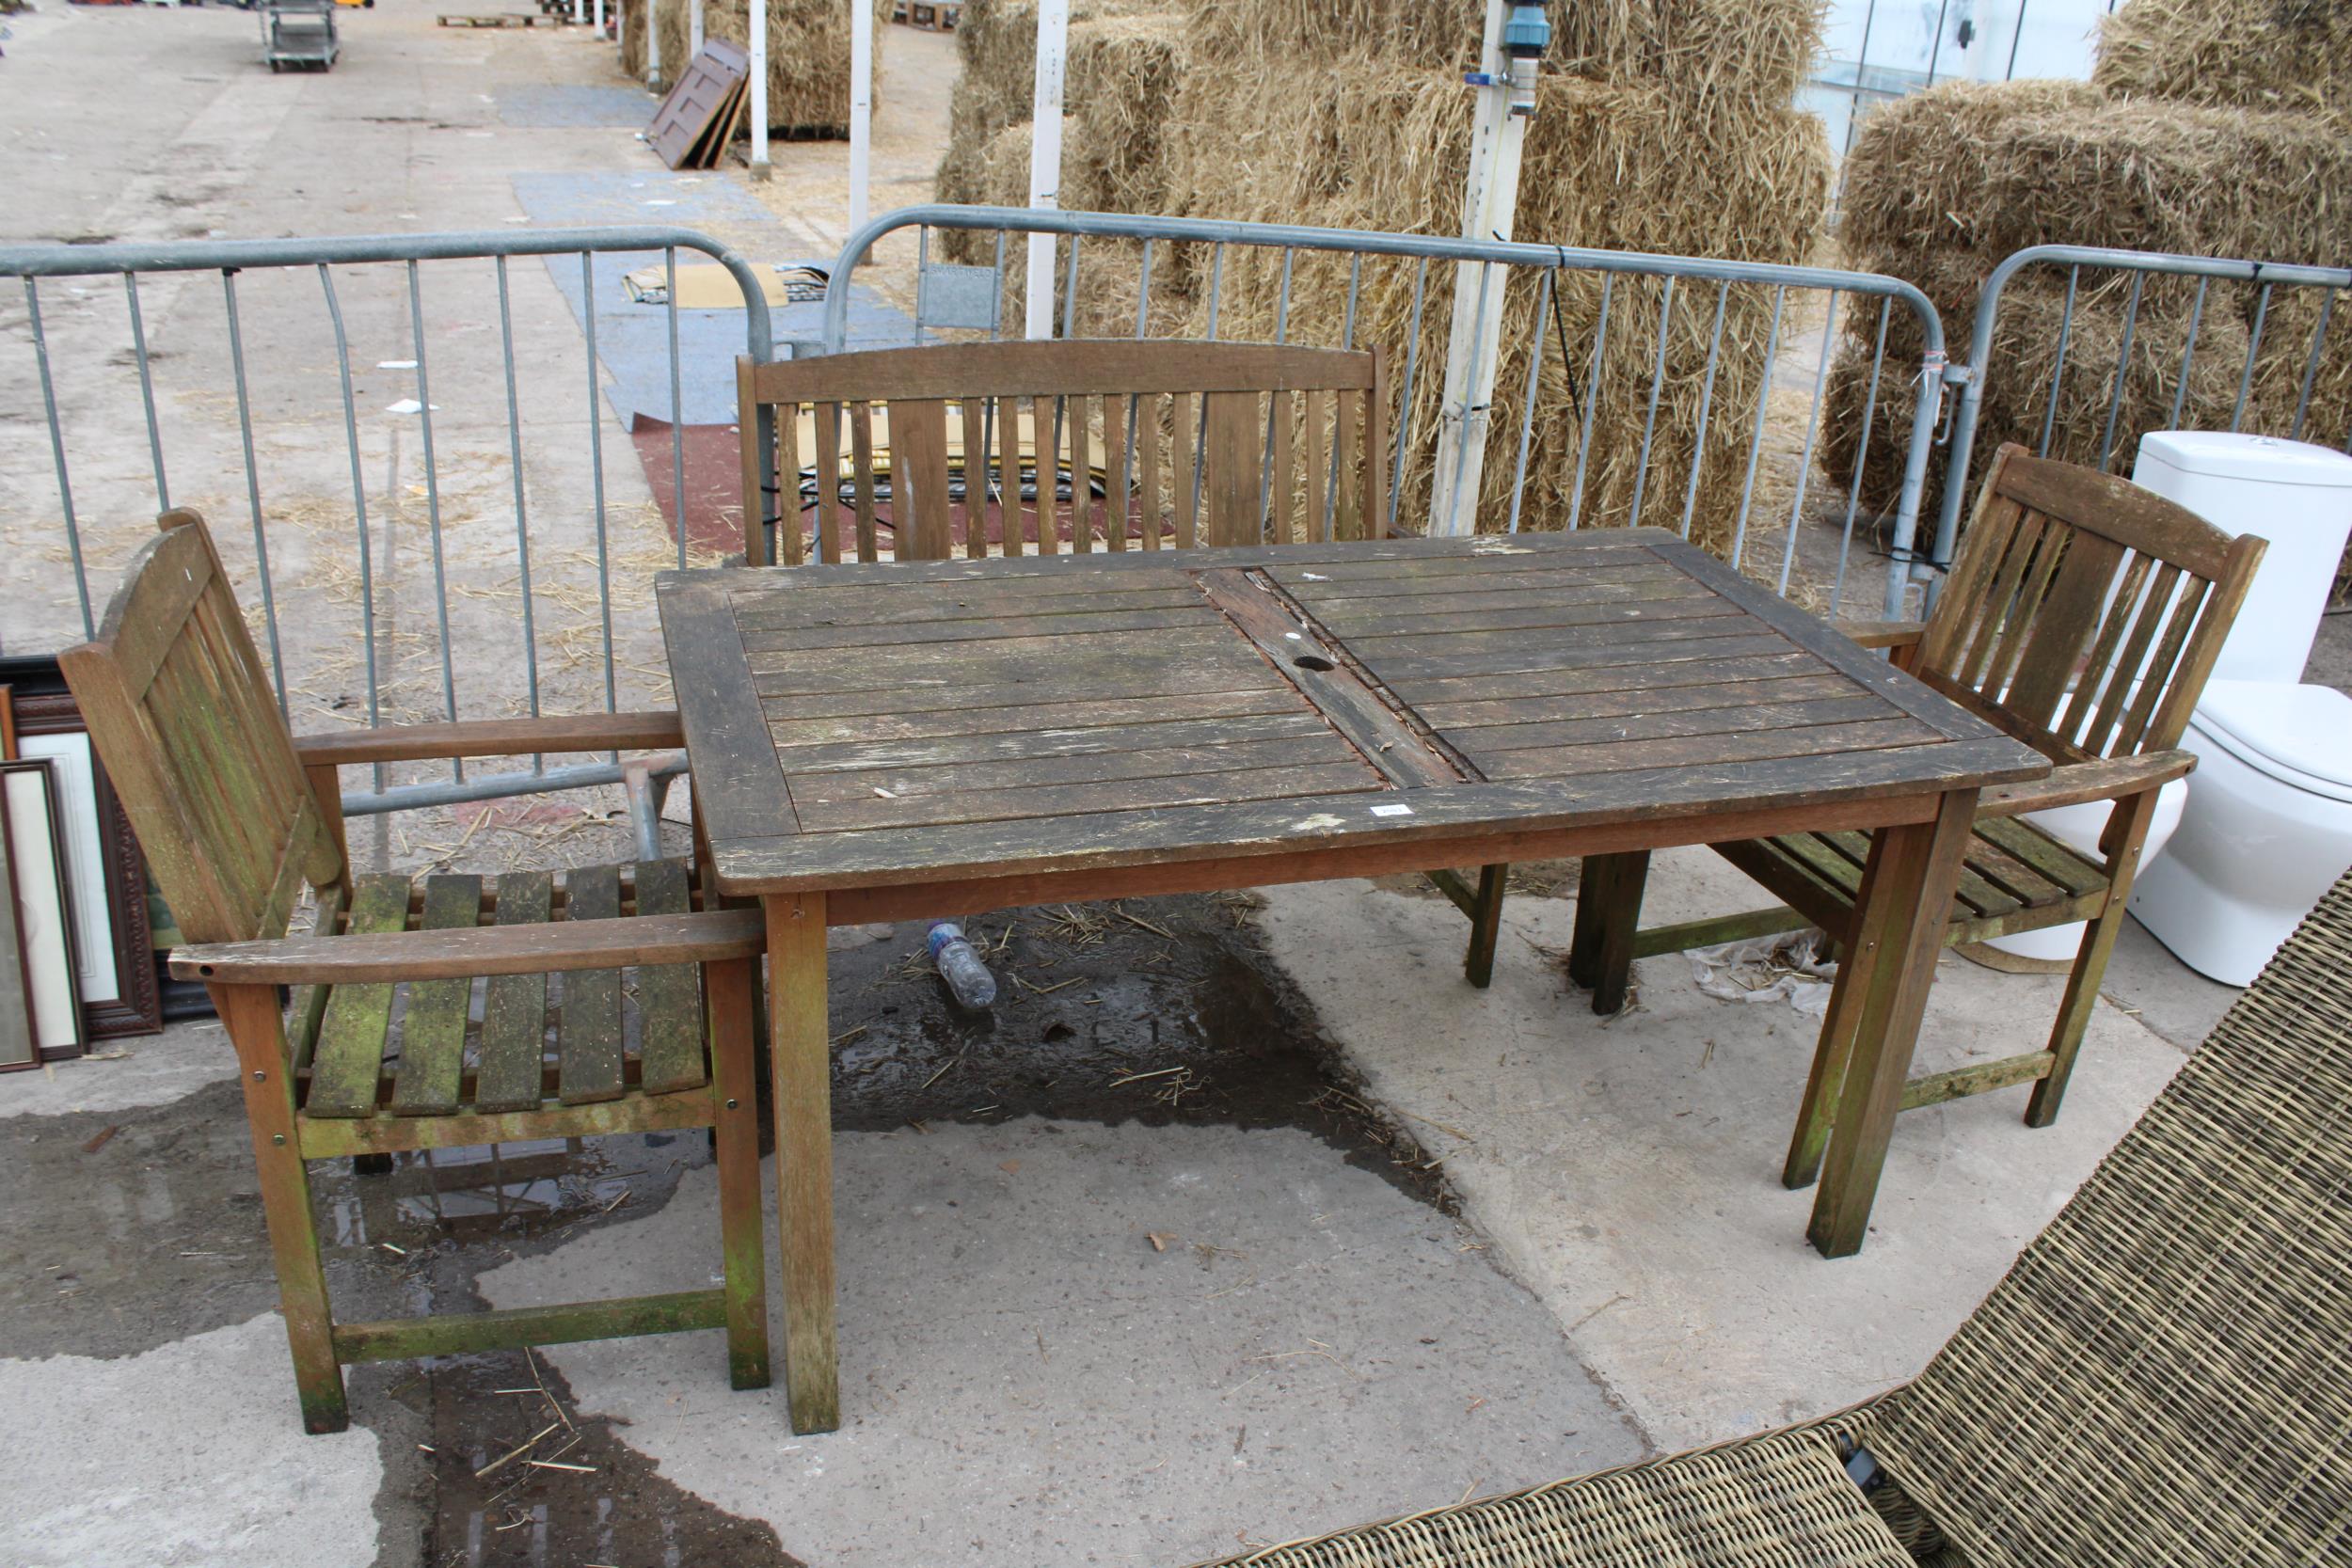 A TEAK GARDEN TABLE WITH A BENCH AND TWO CHAIRS